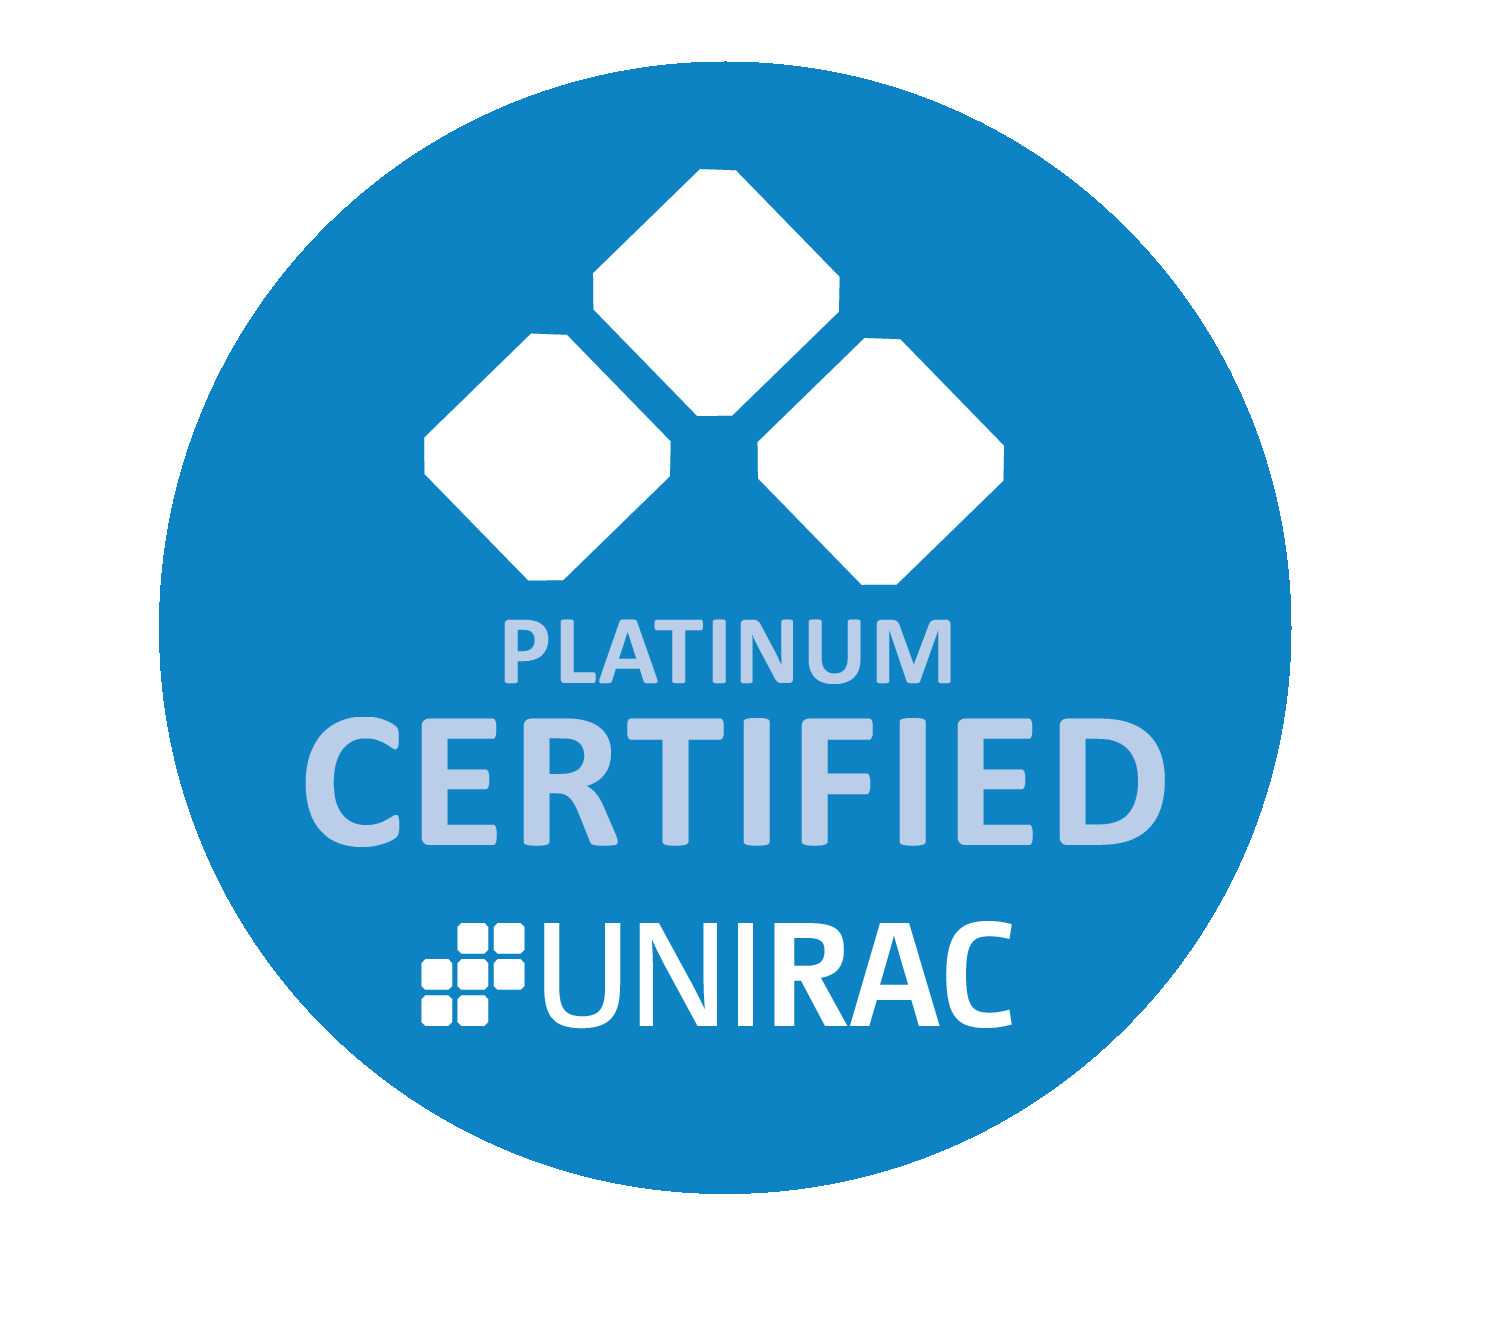 Solar Optimum is the first among solar panel companies in California to become a Platinum-certified installer by Unirac.